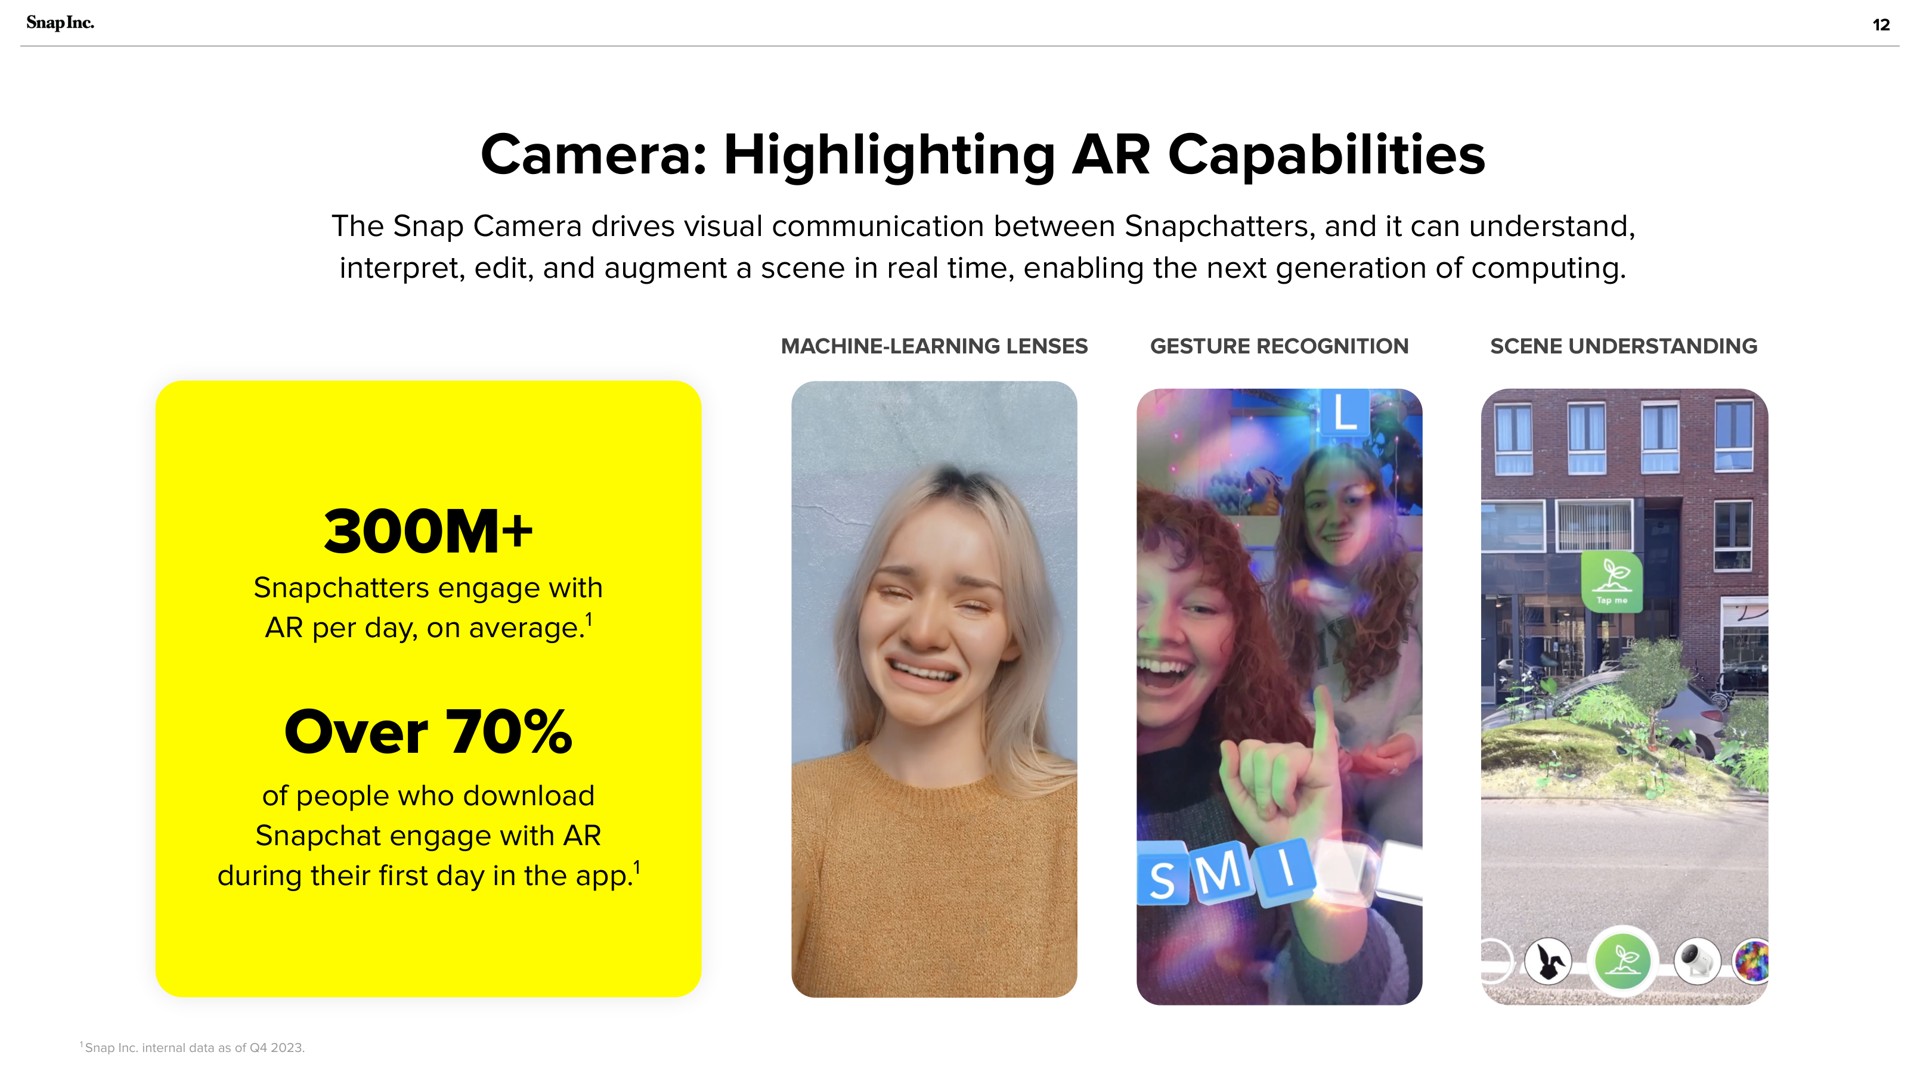 camera highlighting capabilities over per day on average during their first day in the | Snap Inc